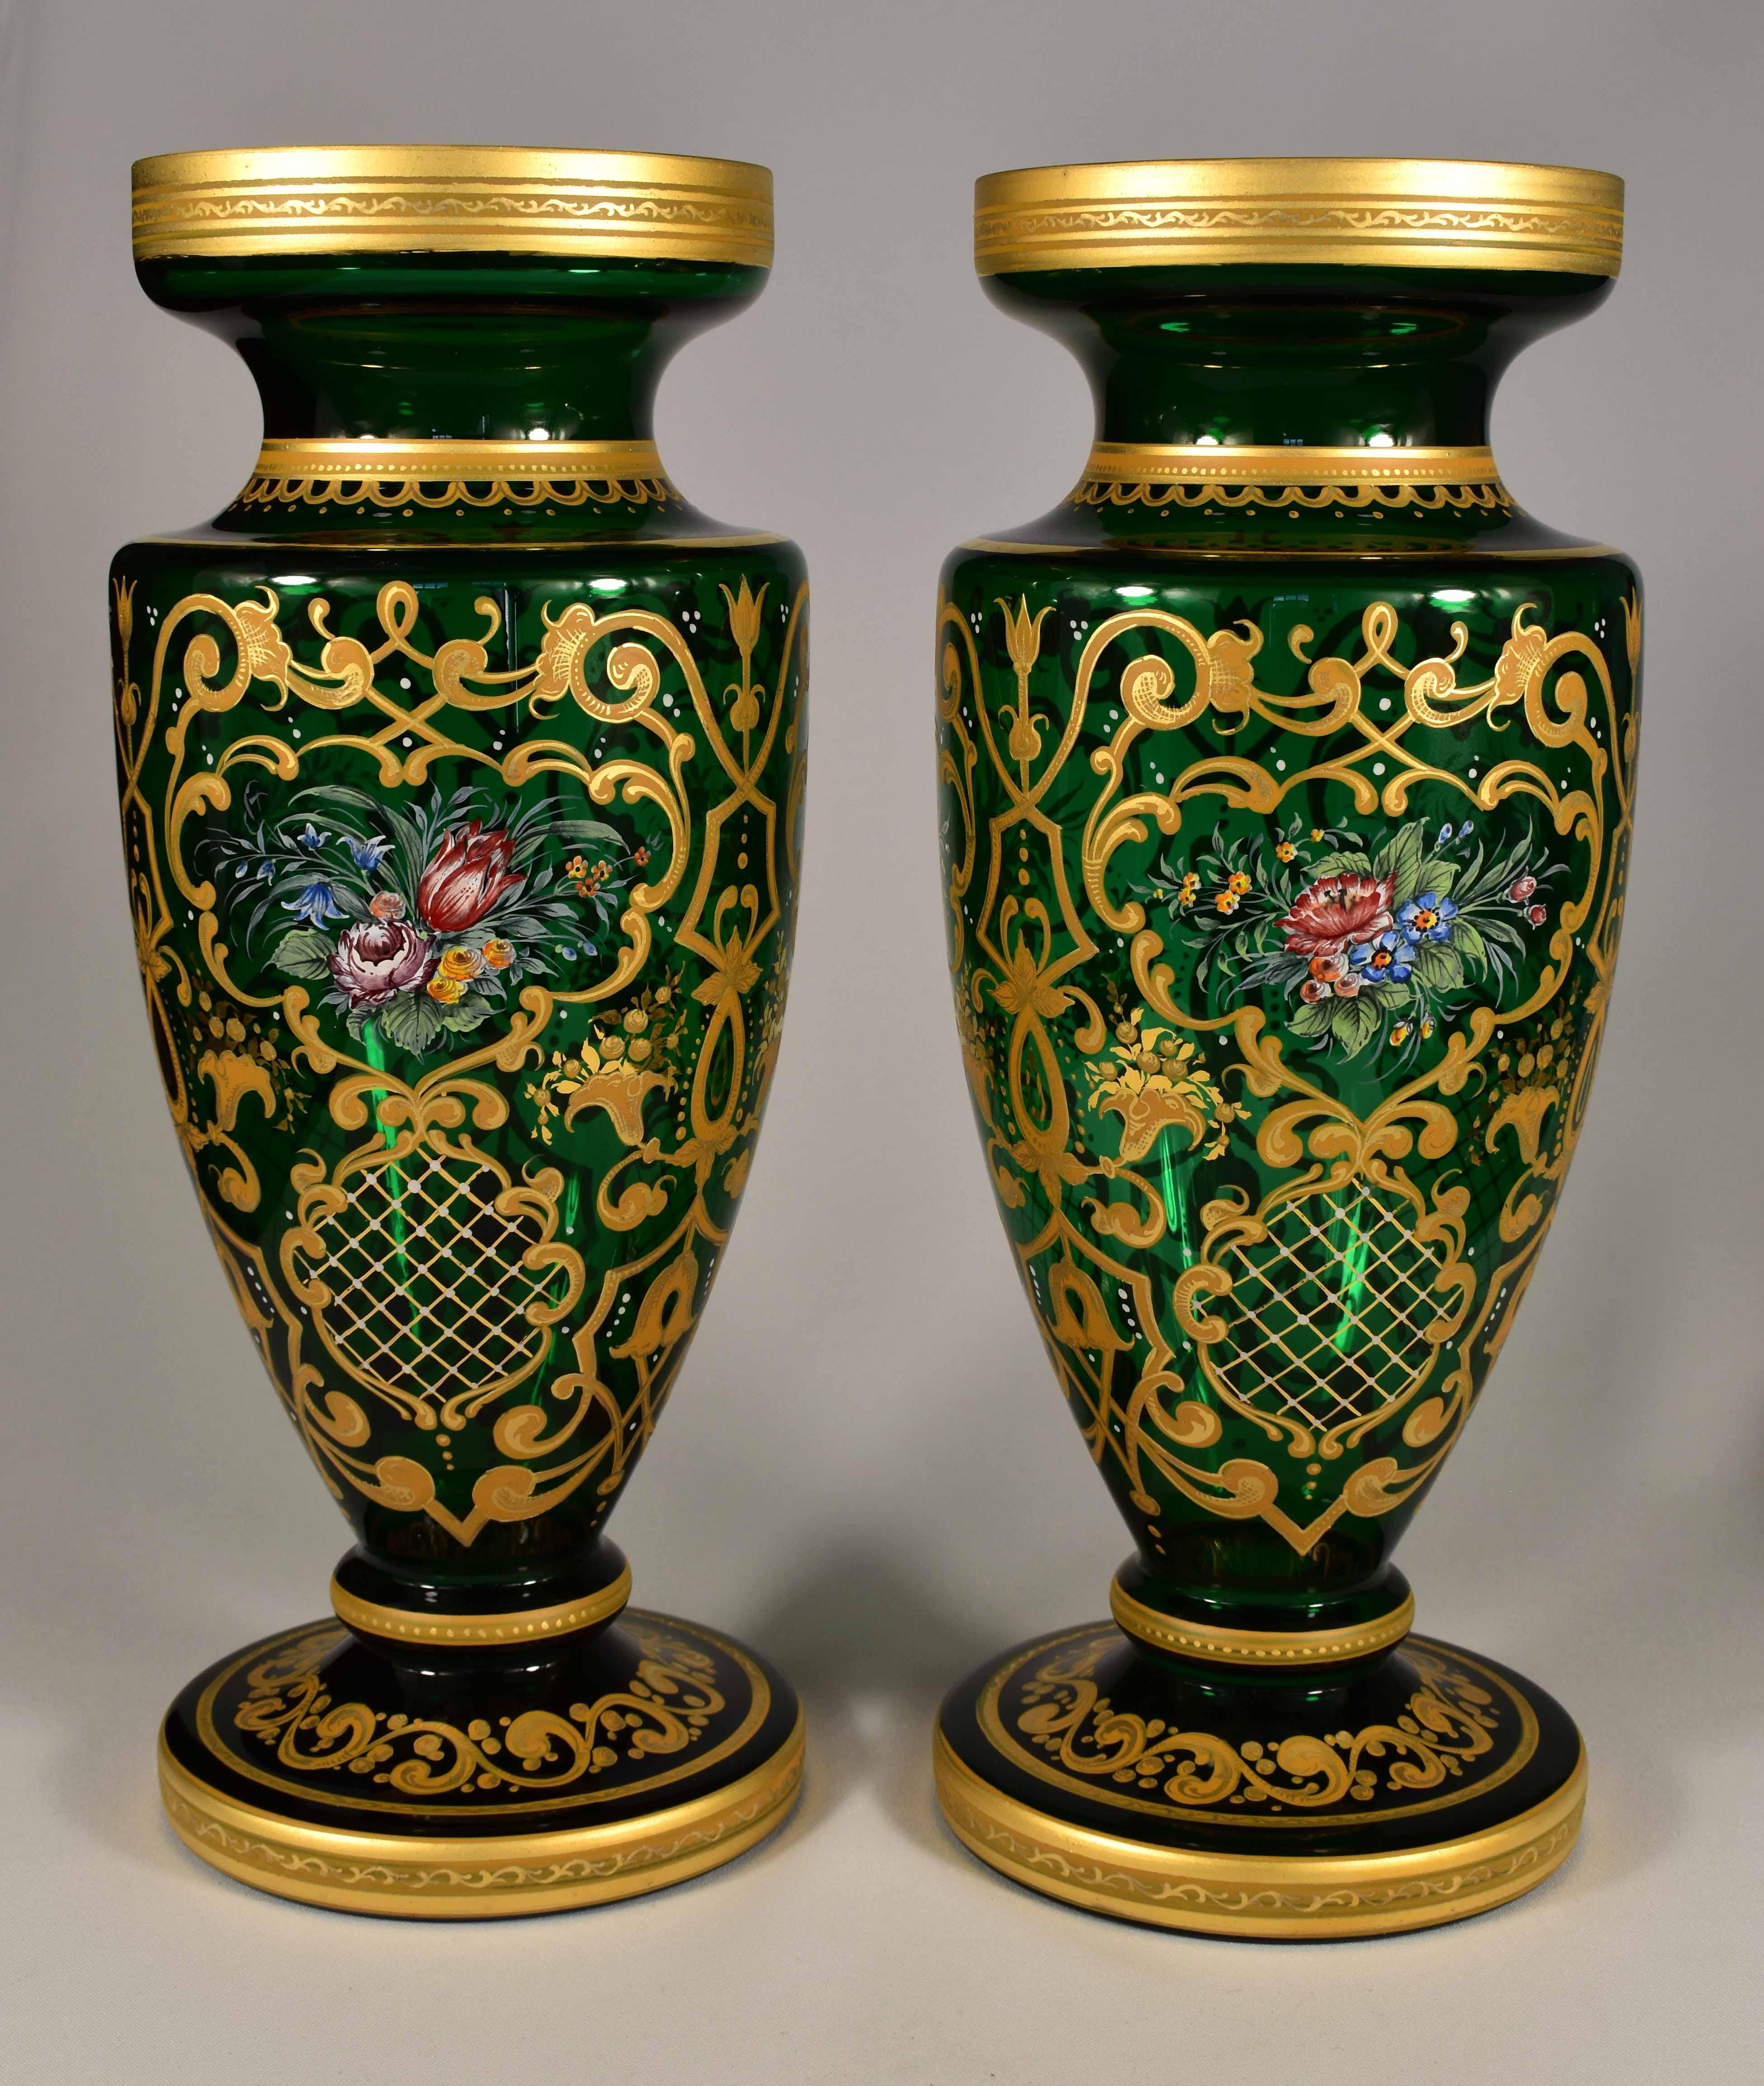 A beautiful pair of hand blown and painted vases, This is the art of Czech glassmakers of the 20th century in the style of the 19th century, Ornamental painting in ocher colors, supplemented with a floral motif, everything is gilded. A beautiful